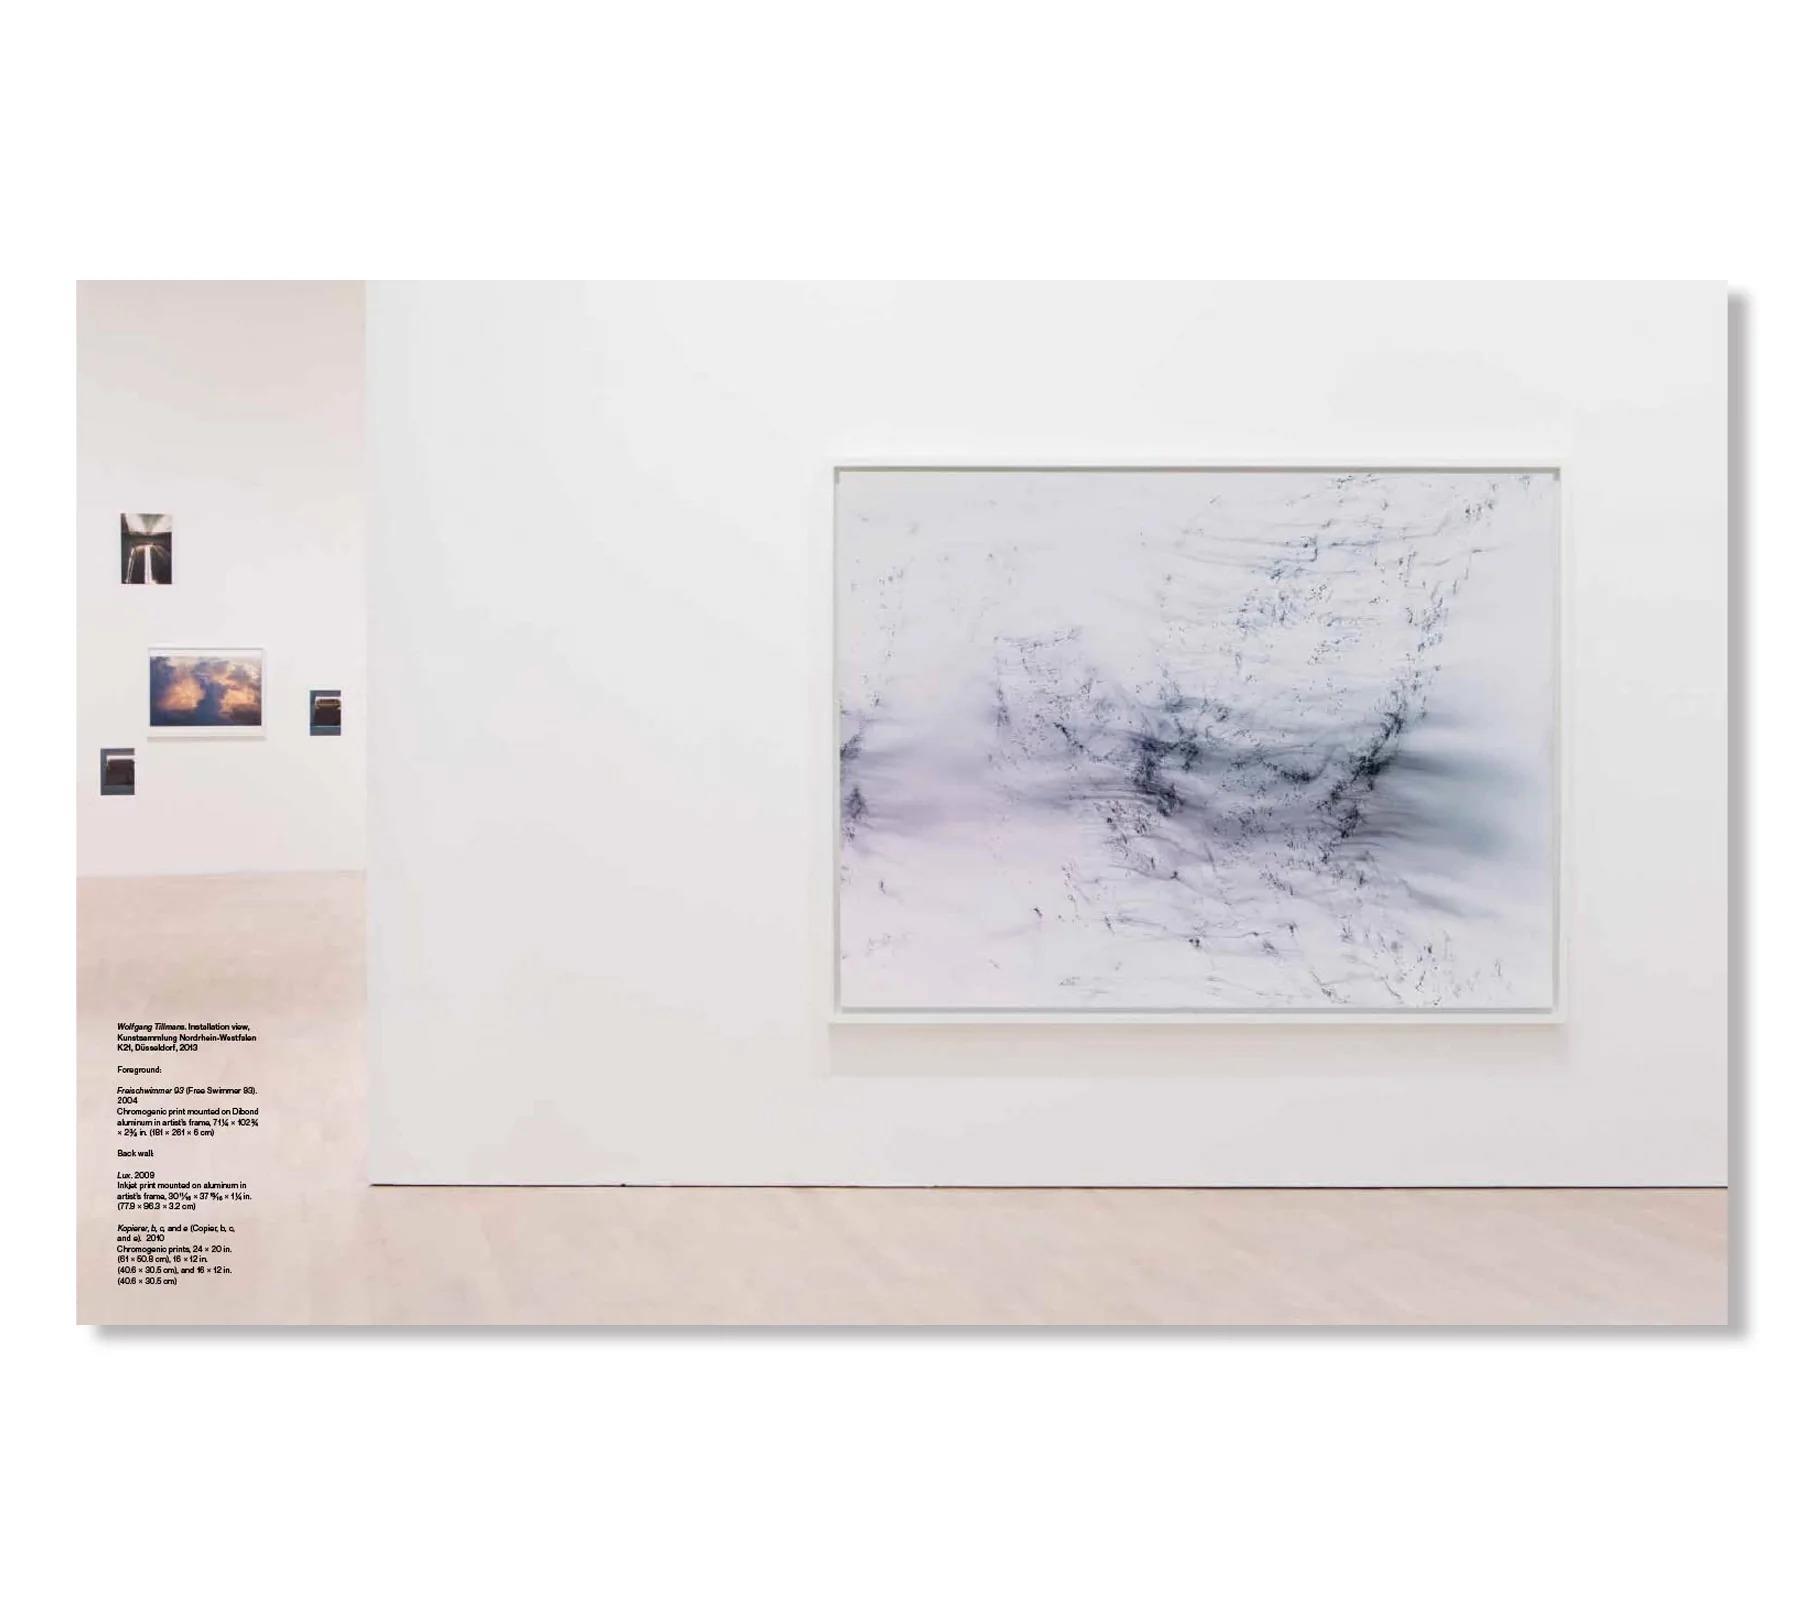 TO LOOK WITHOUT FEAR by Wolfgang Tillmans ヴォルフガング・ティルマンス 作品集